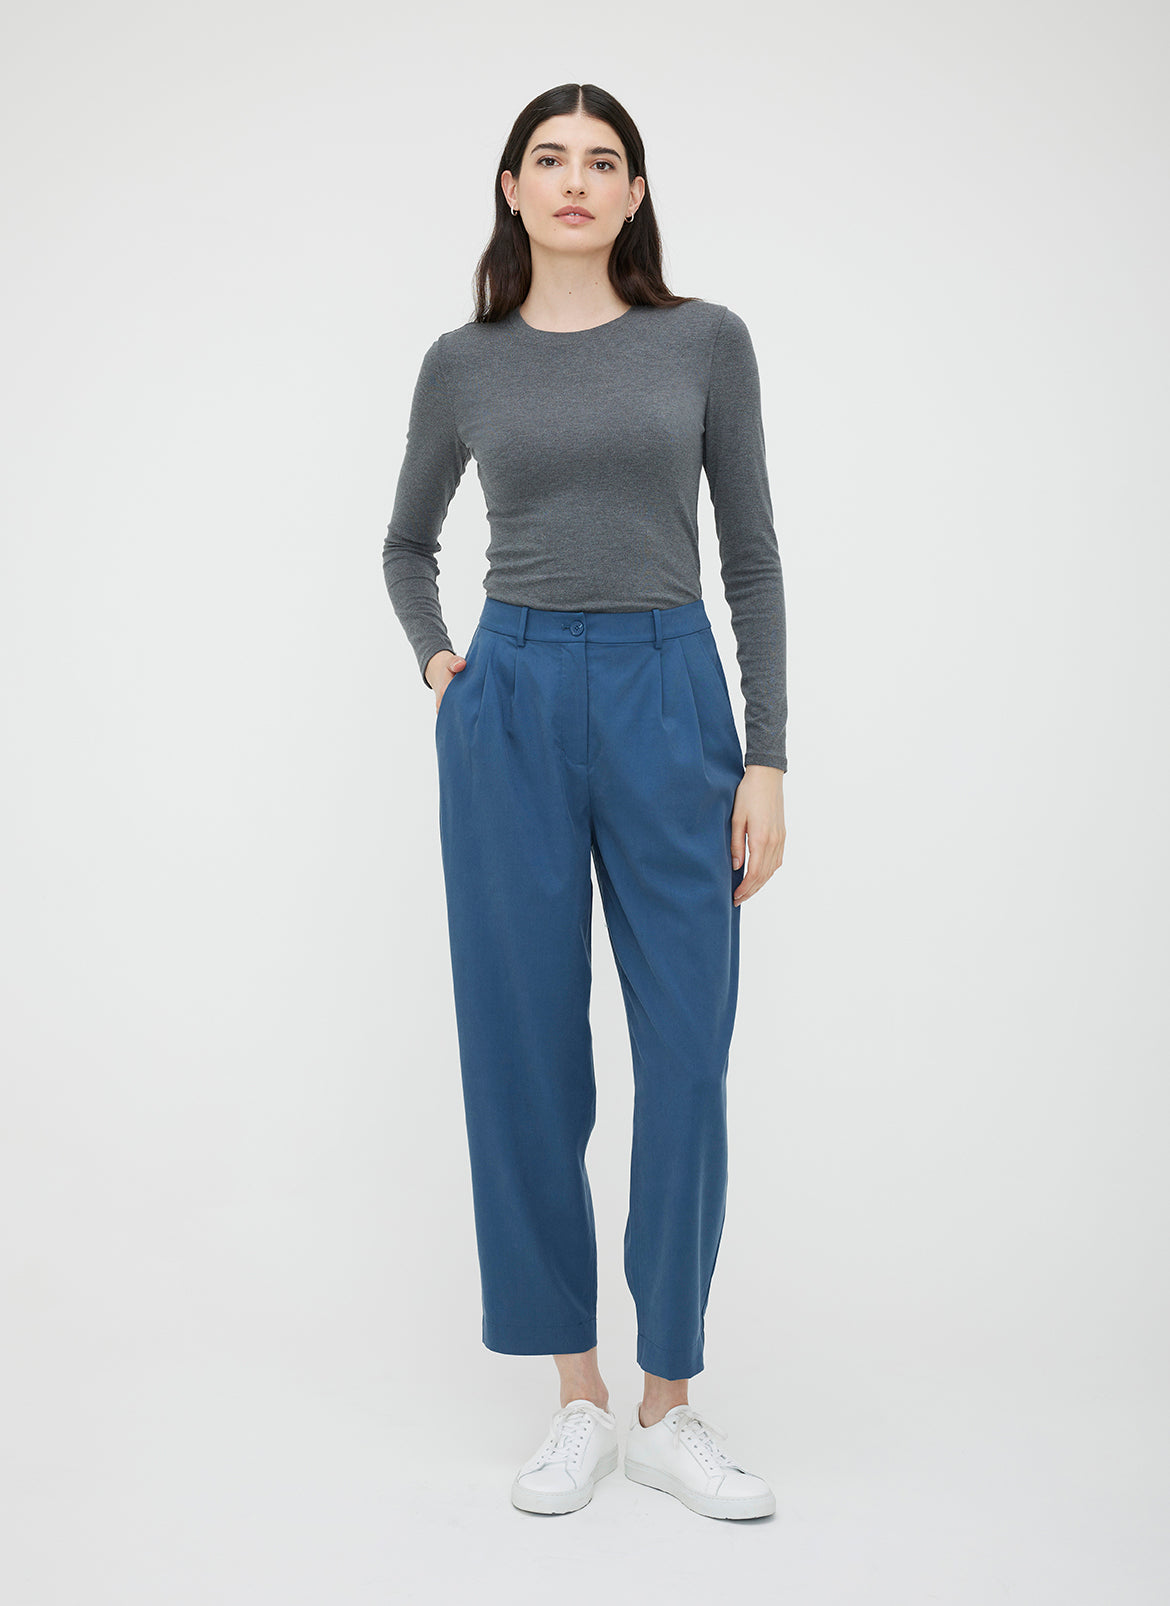 Kit and Ace — Sublime Ankle Trousers